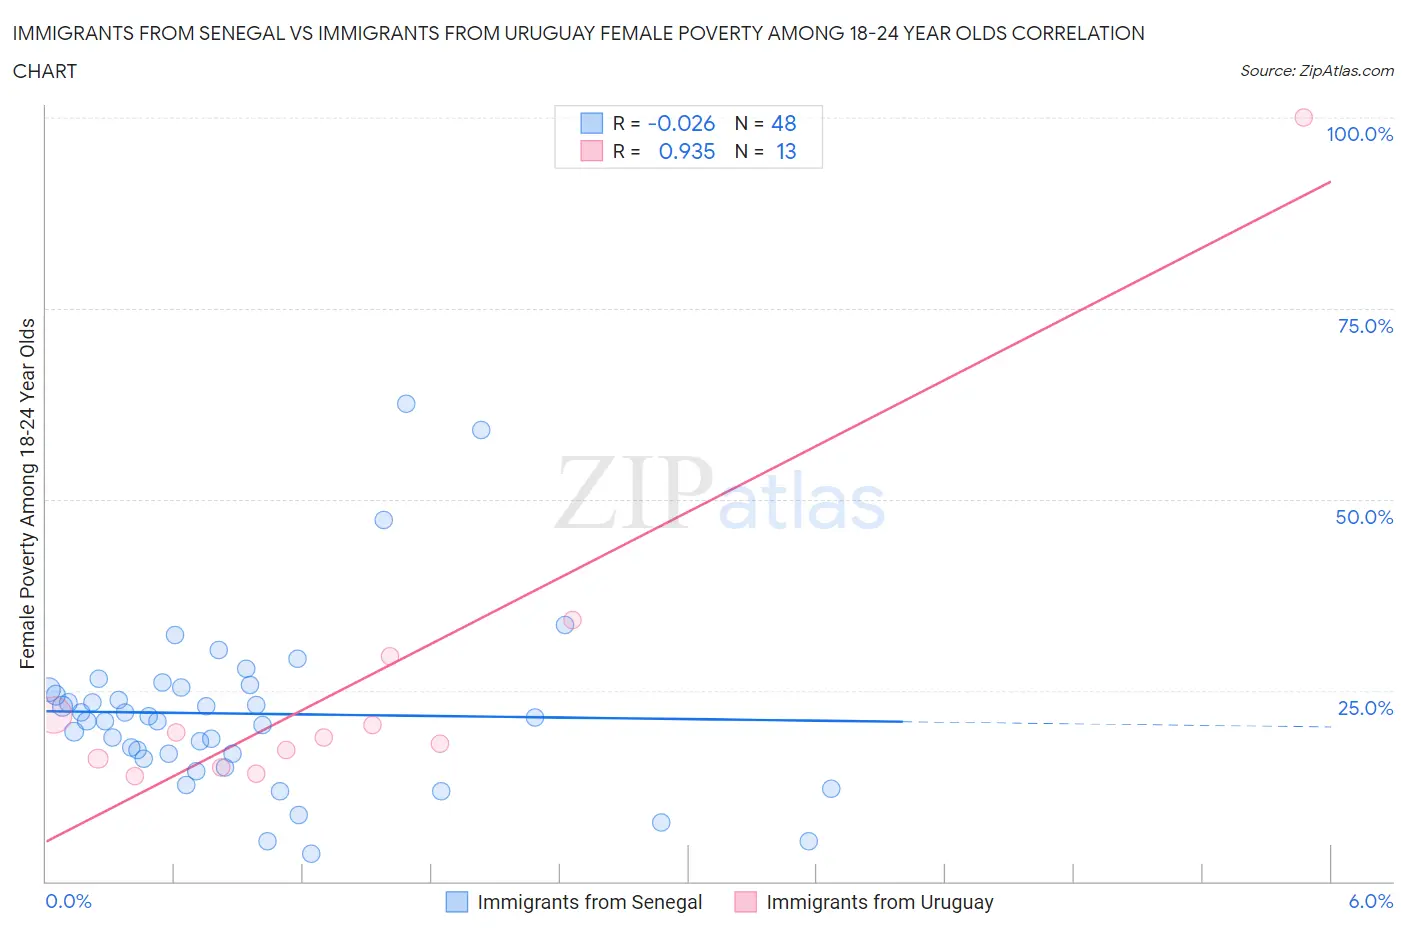 Immigrants from Senegal vs Immigrants from Uruguay Female Poverty Among 18-24 Year Olds